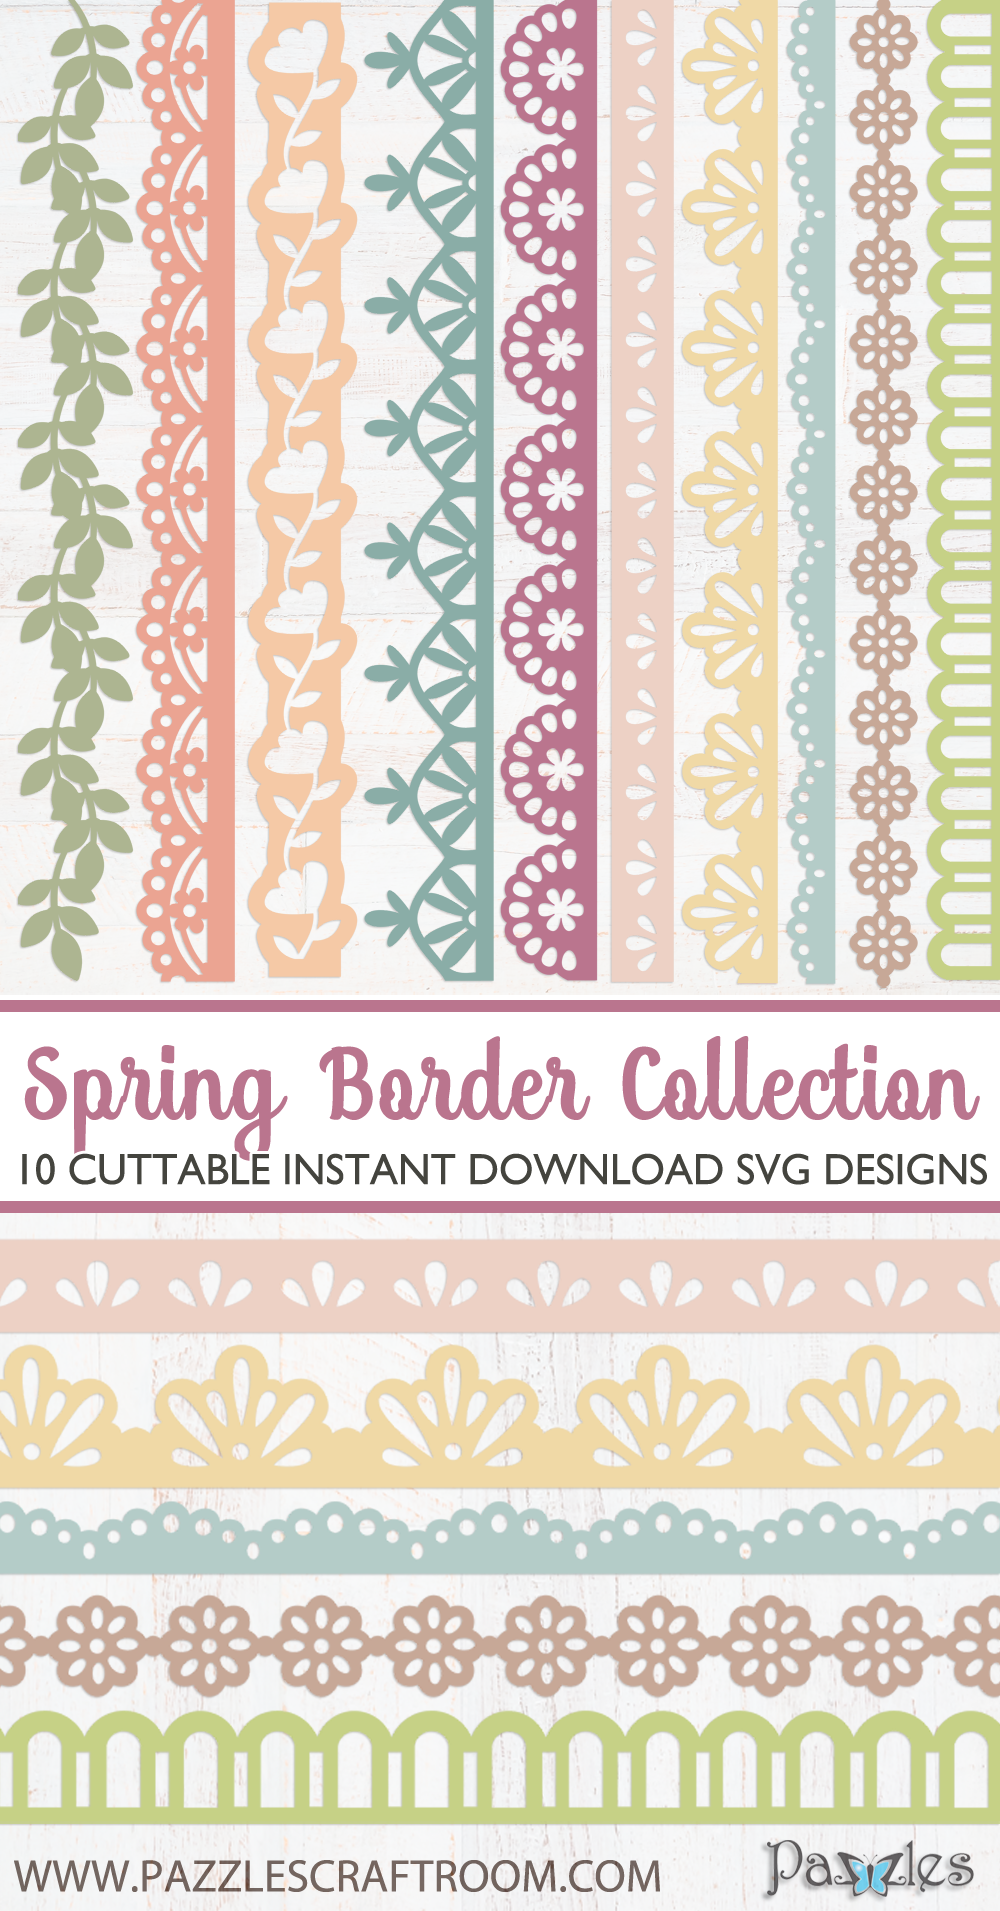 Pazzles DIY Collection of 10 Spring Border SVG Designs. Instant download in SVG, AI, and WPC compatible with all major electronic cutters including Pazzles Inspiration, Cricut, and Silhouette Cameo.